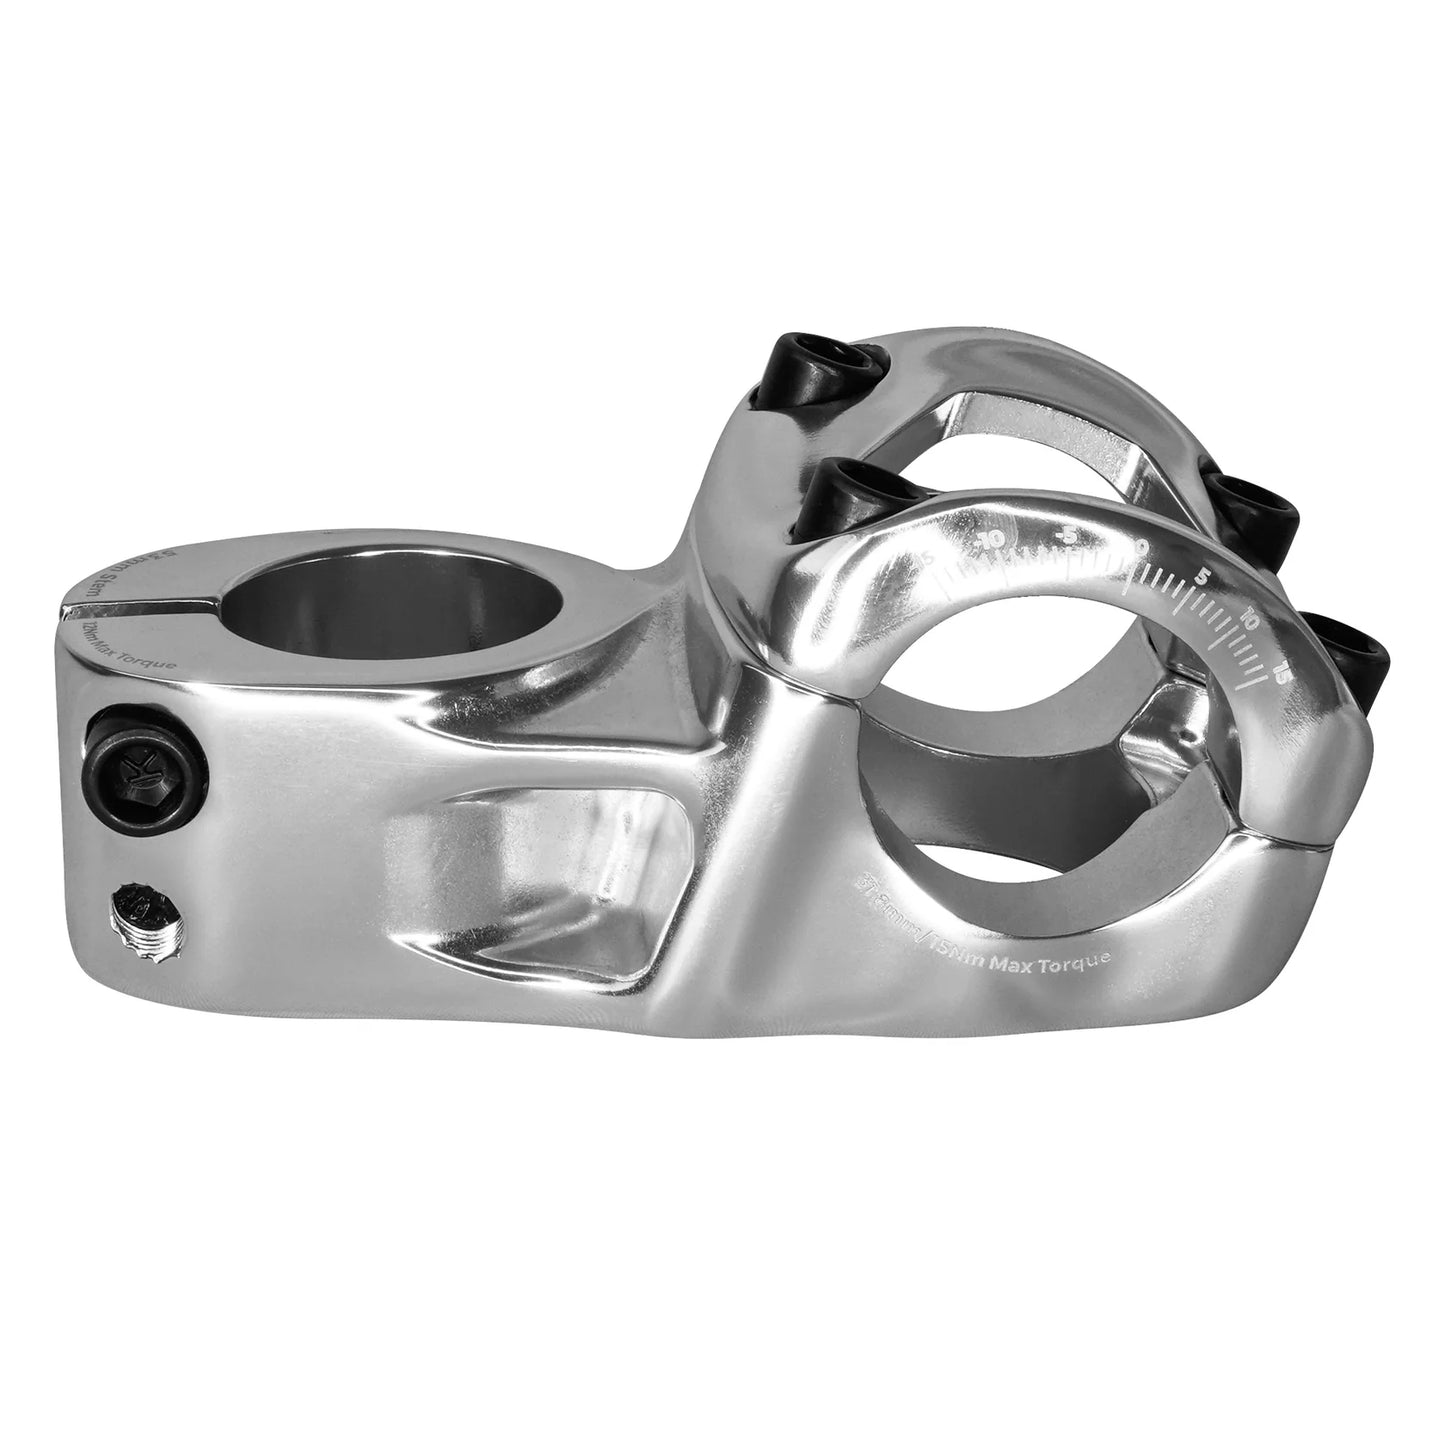 BOX One Oversized 31.8 x 1-1/8th Top Load Stem